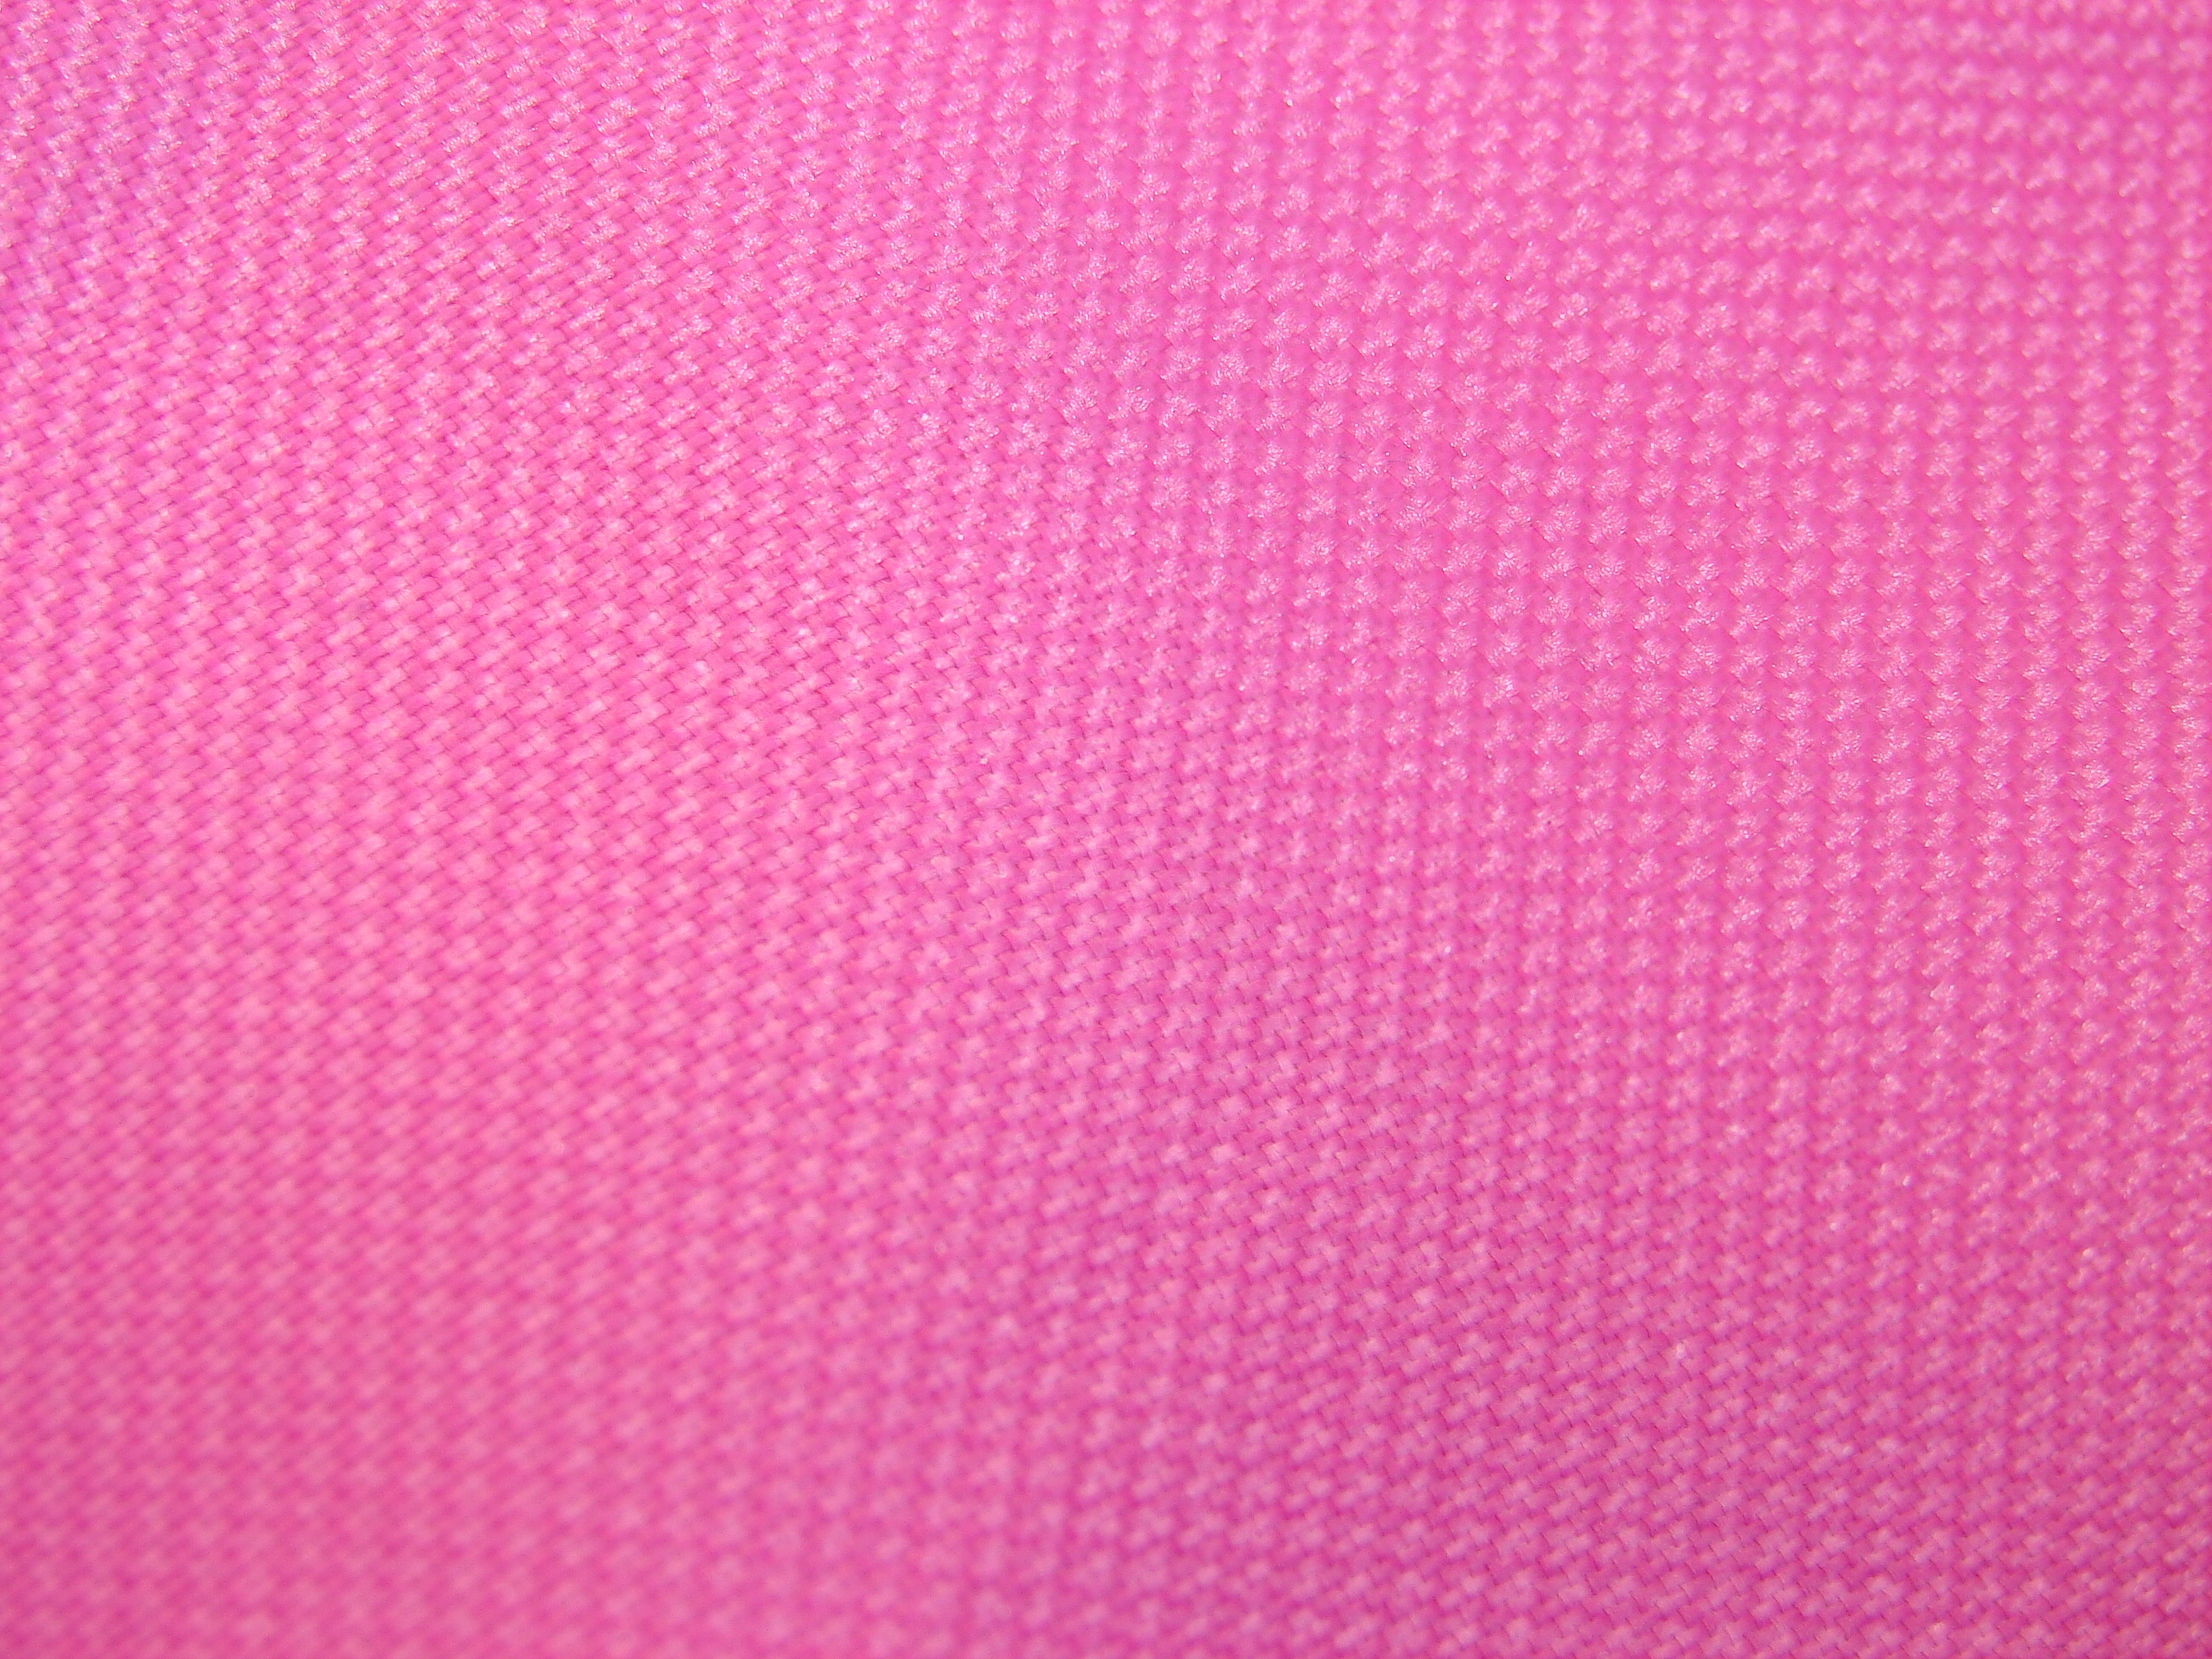 Pink Canvas Fabric Texture